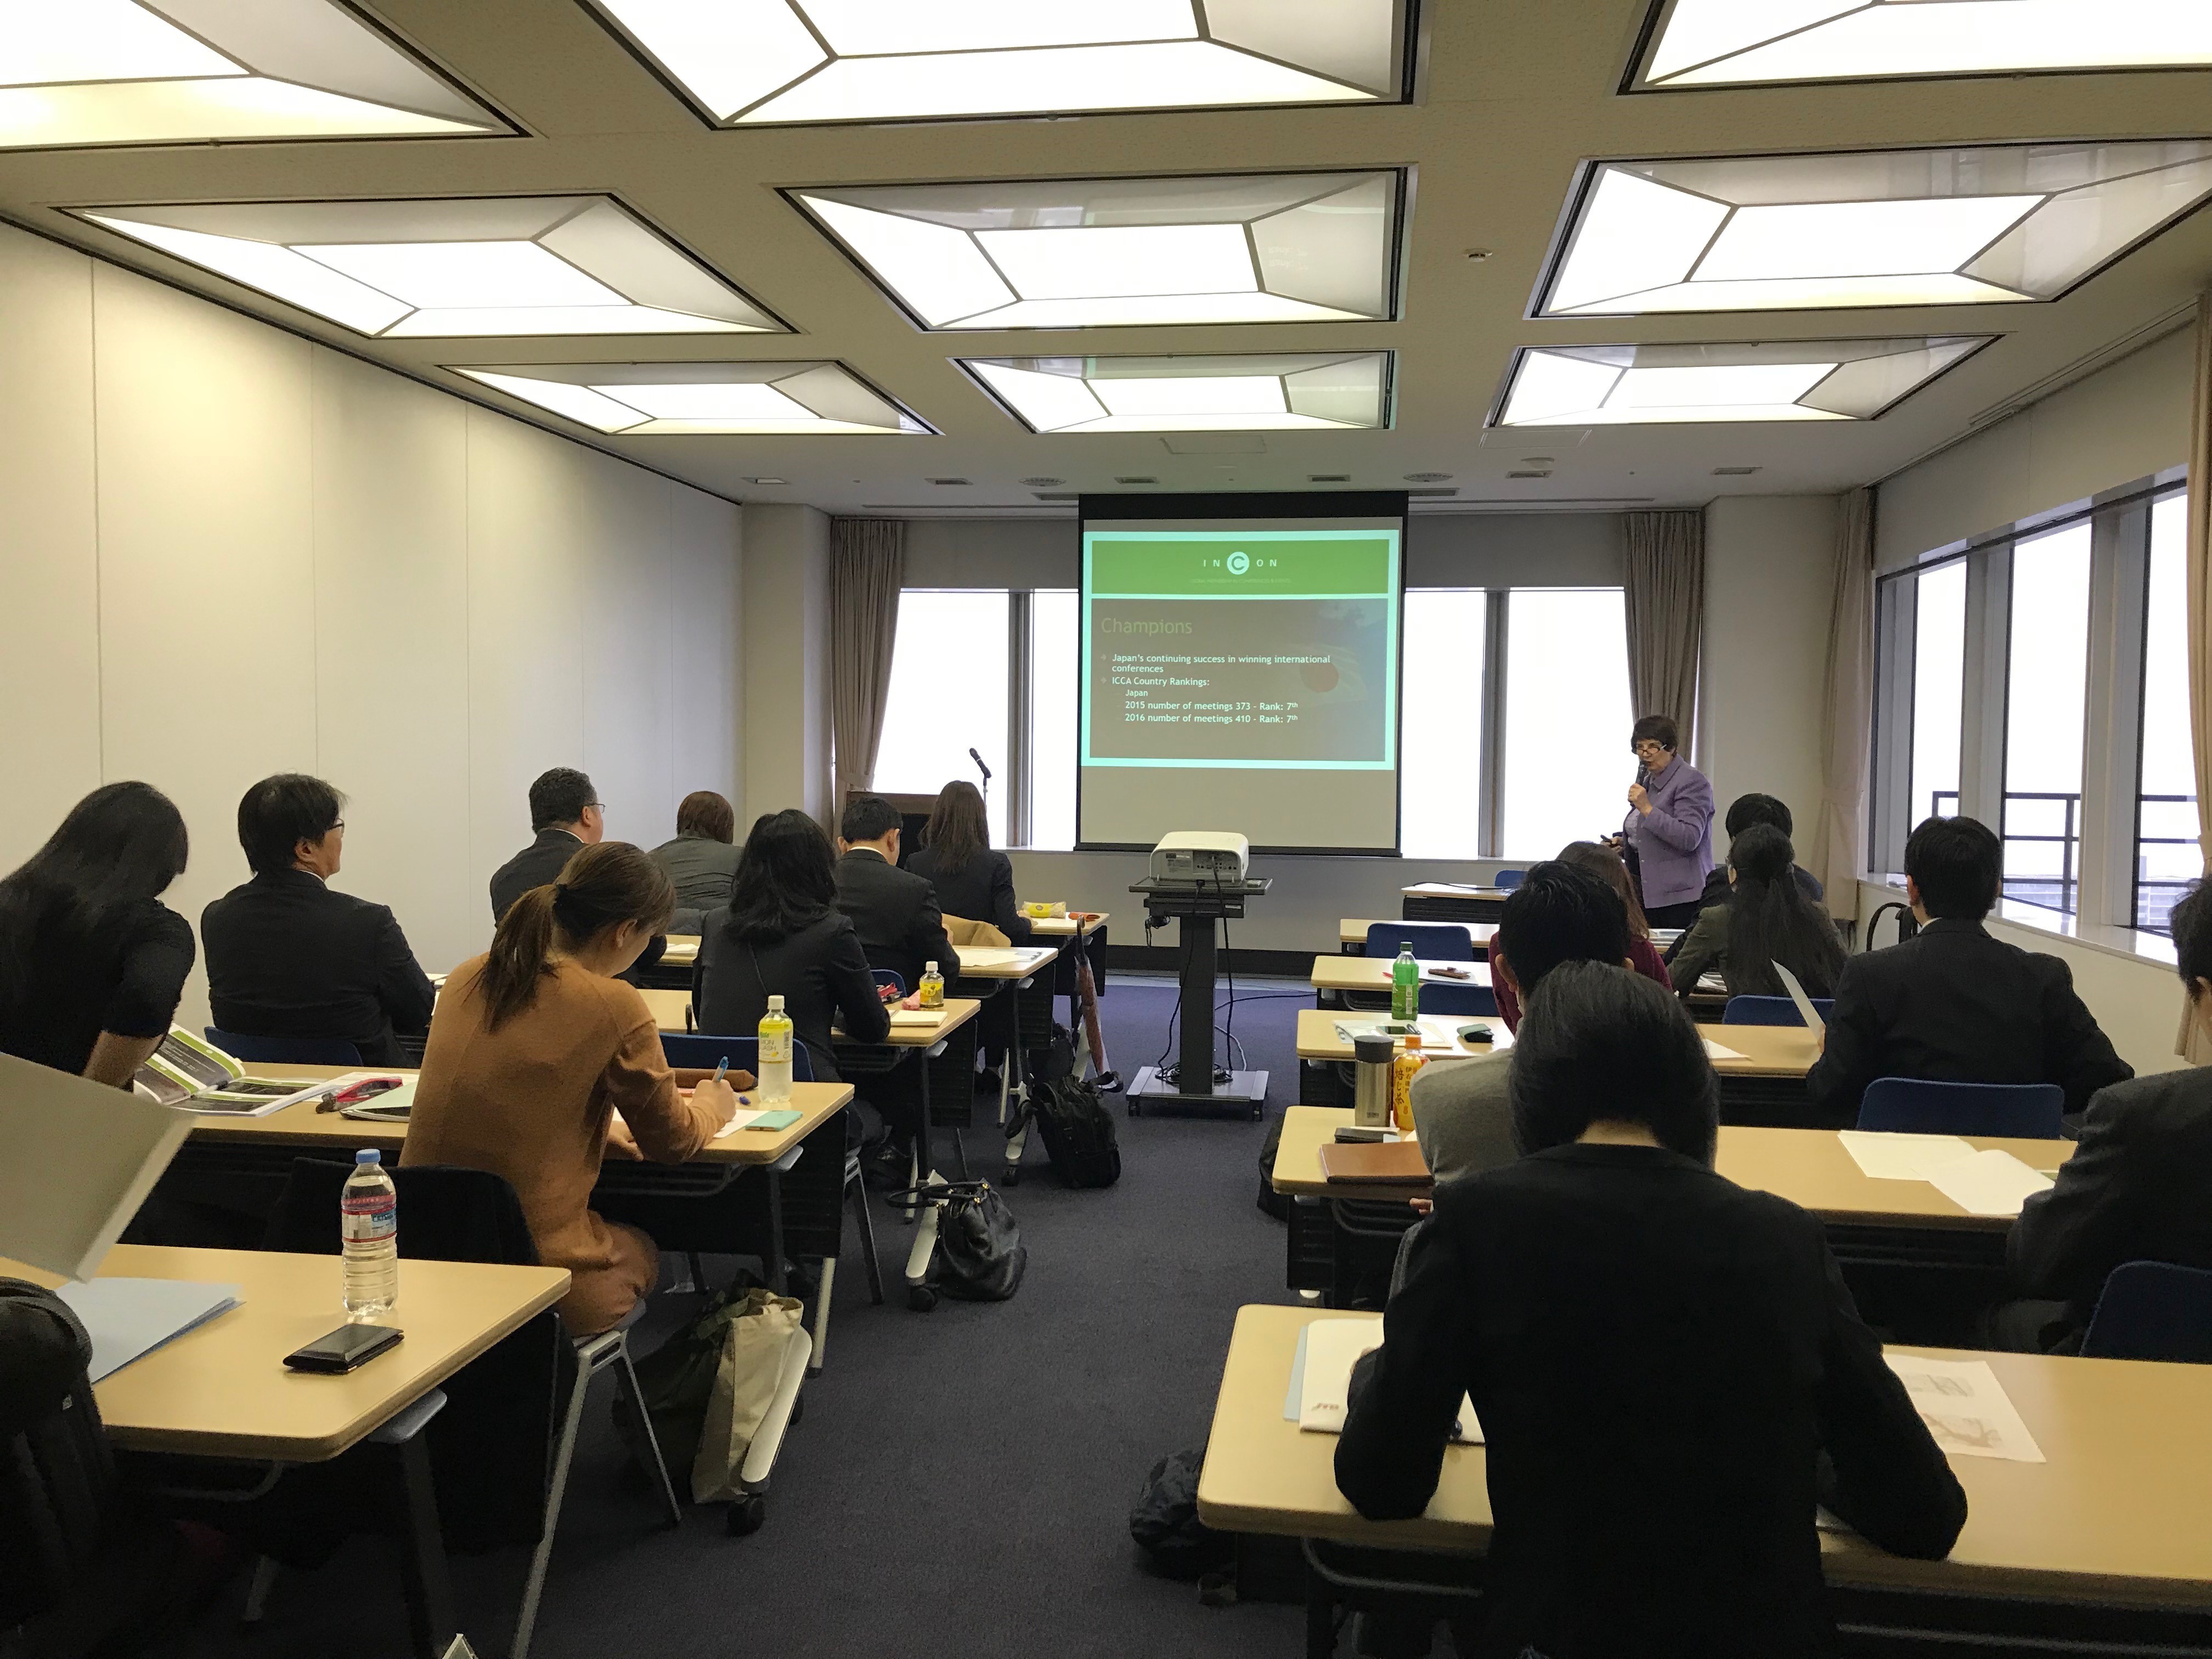 JNTO Meetings Industry Seminar in Osaka: "Trends and Practices to win International Meetings"